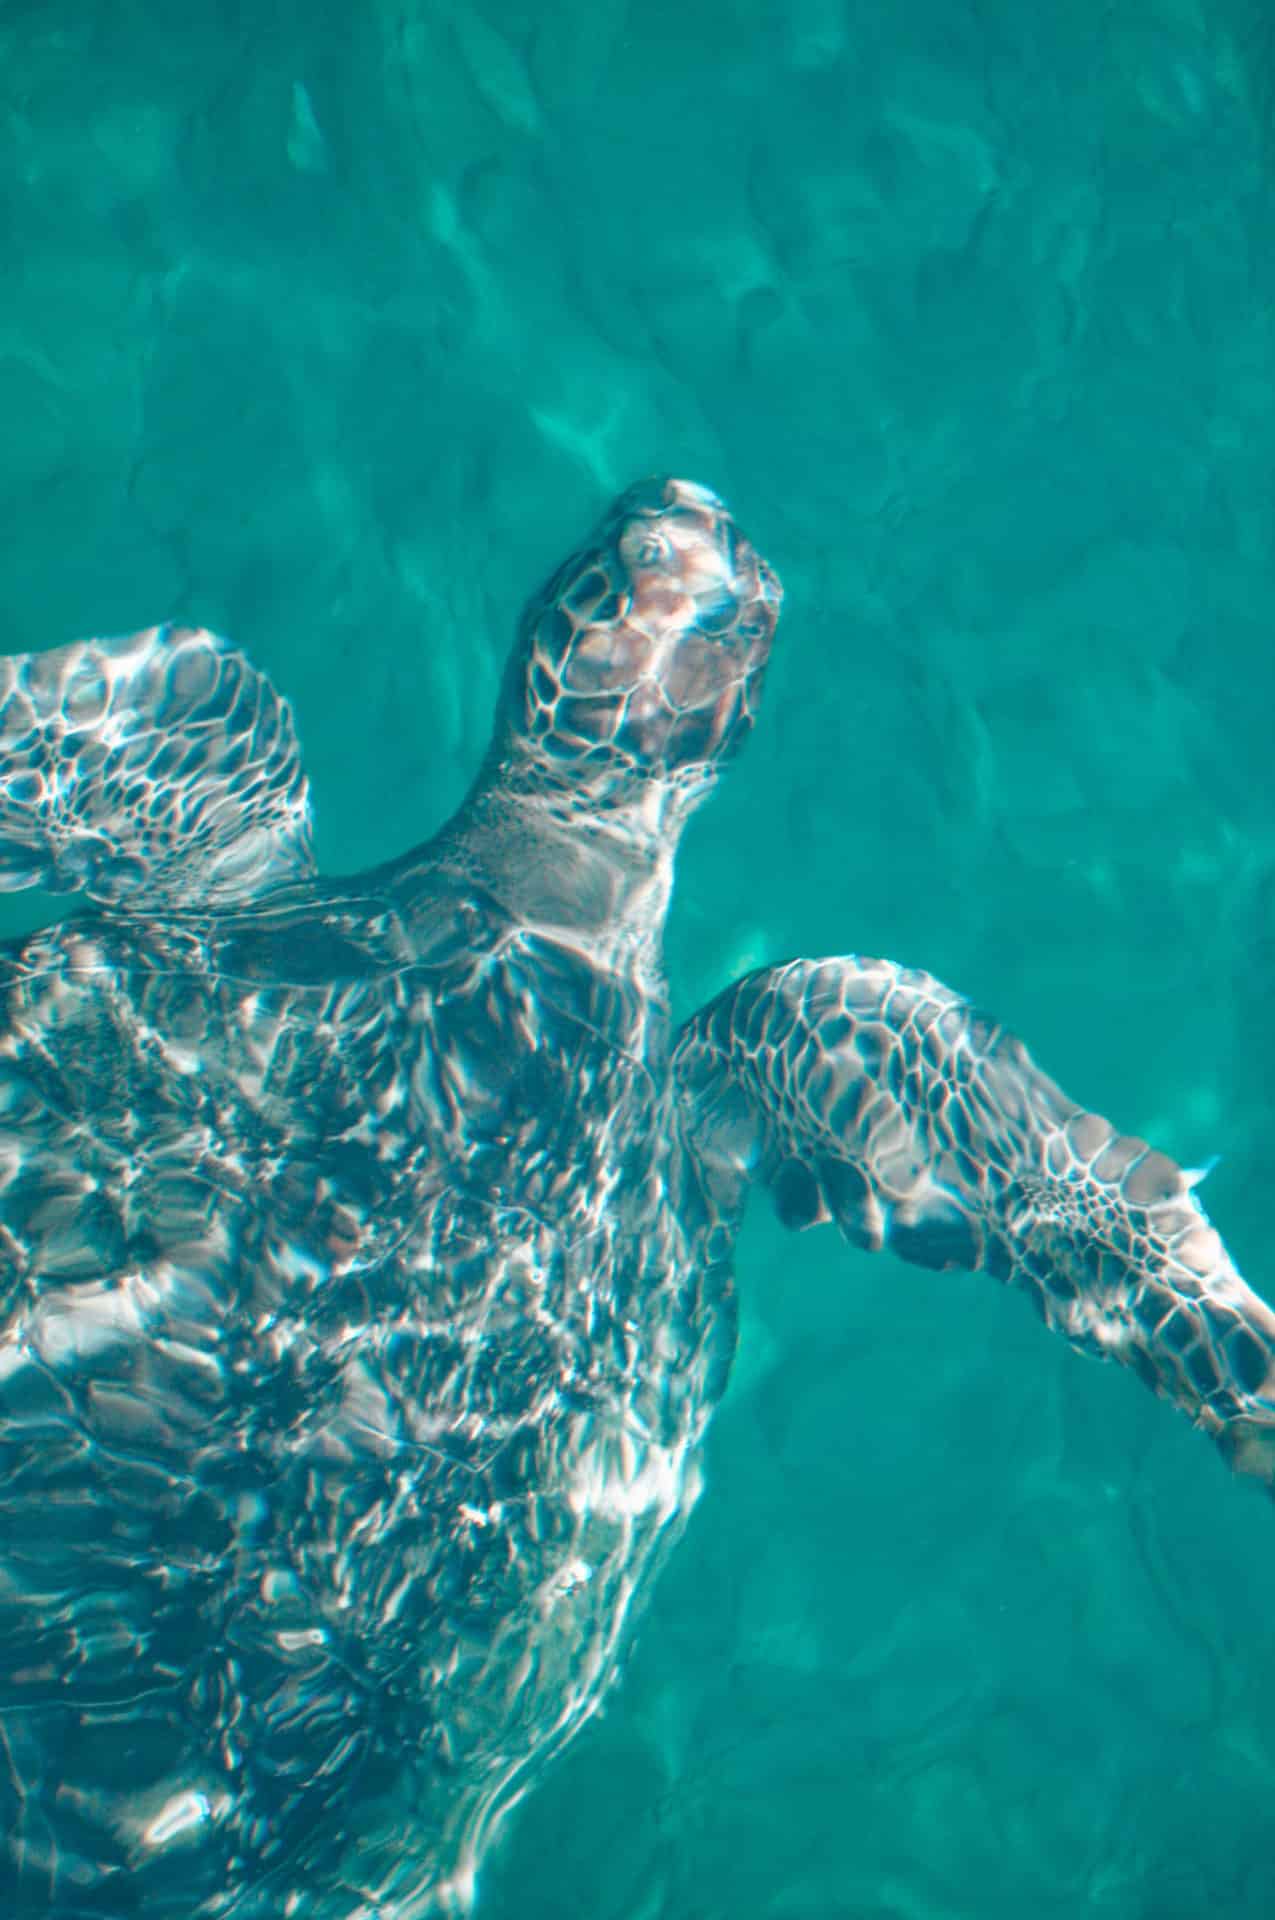 When you plan a sustainable holiday be aware of animal interactions, such as snorkeling trips.